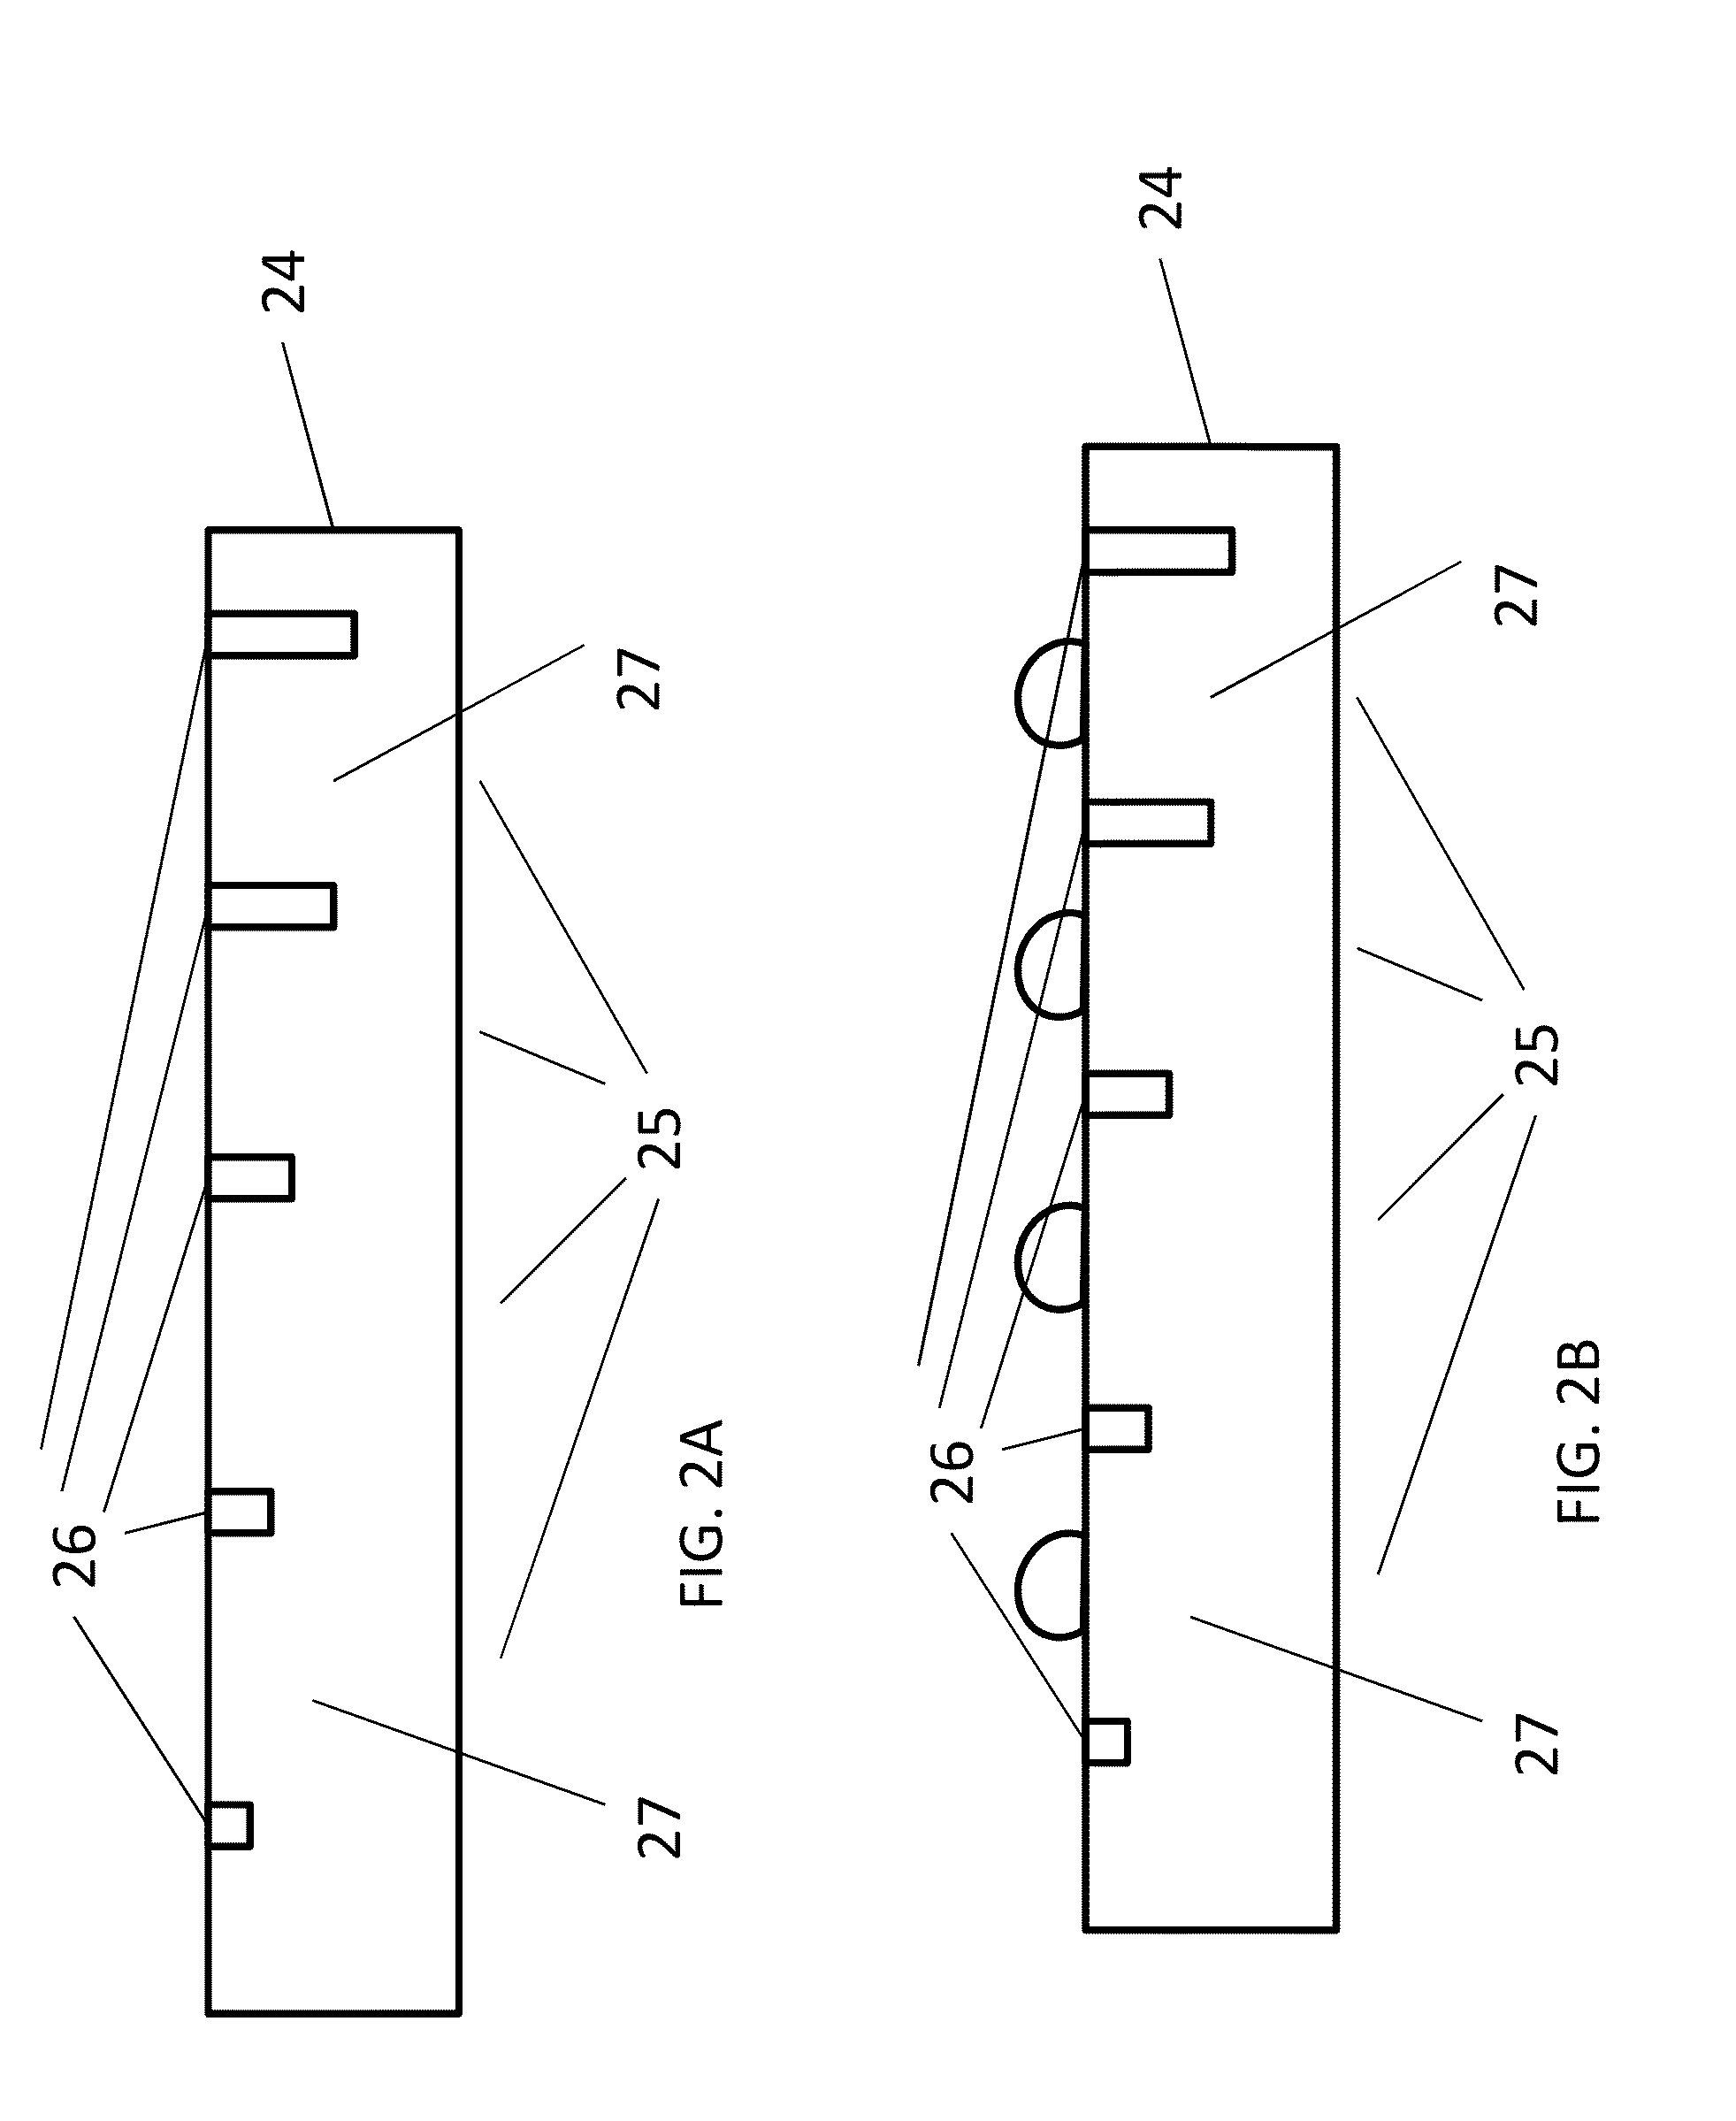 Object tracking system and method